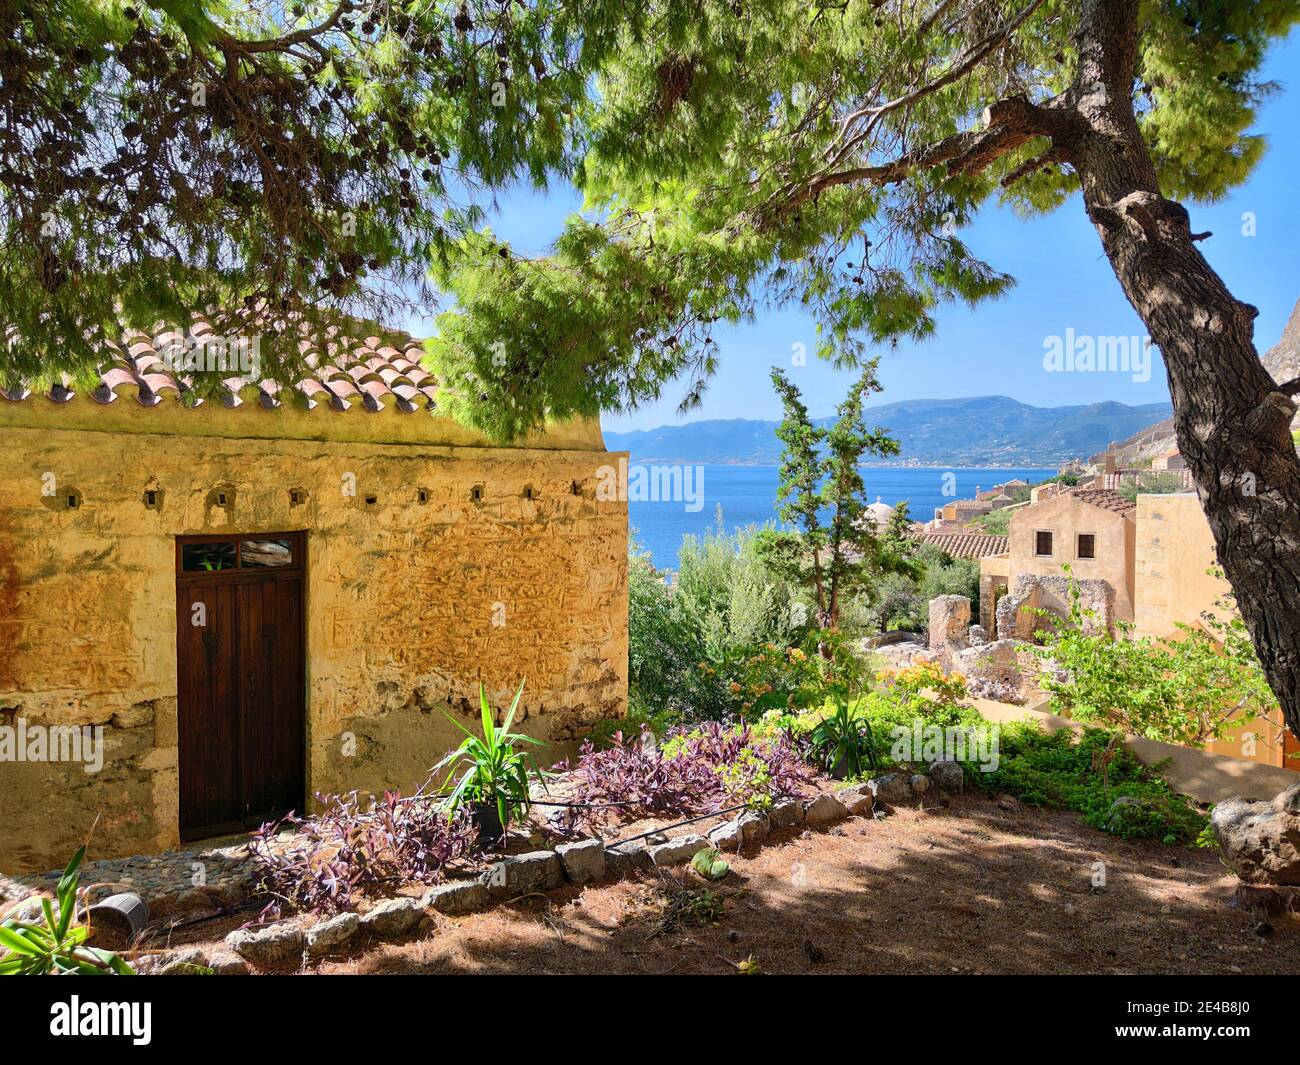 Old houses, sun and pine trees in lower town of Monemvasia, a magical place without cars, Laconia, Peloponnese, Greece Stock Photo